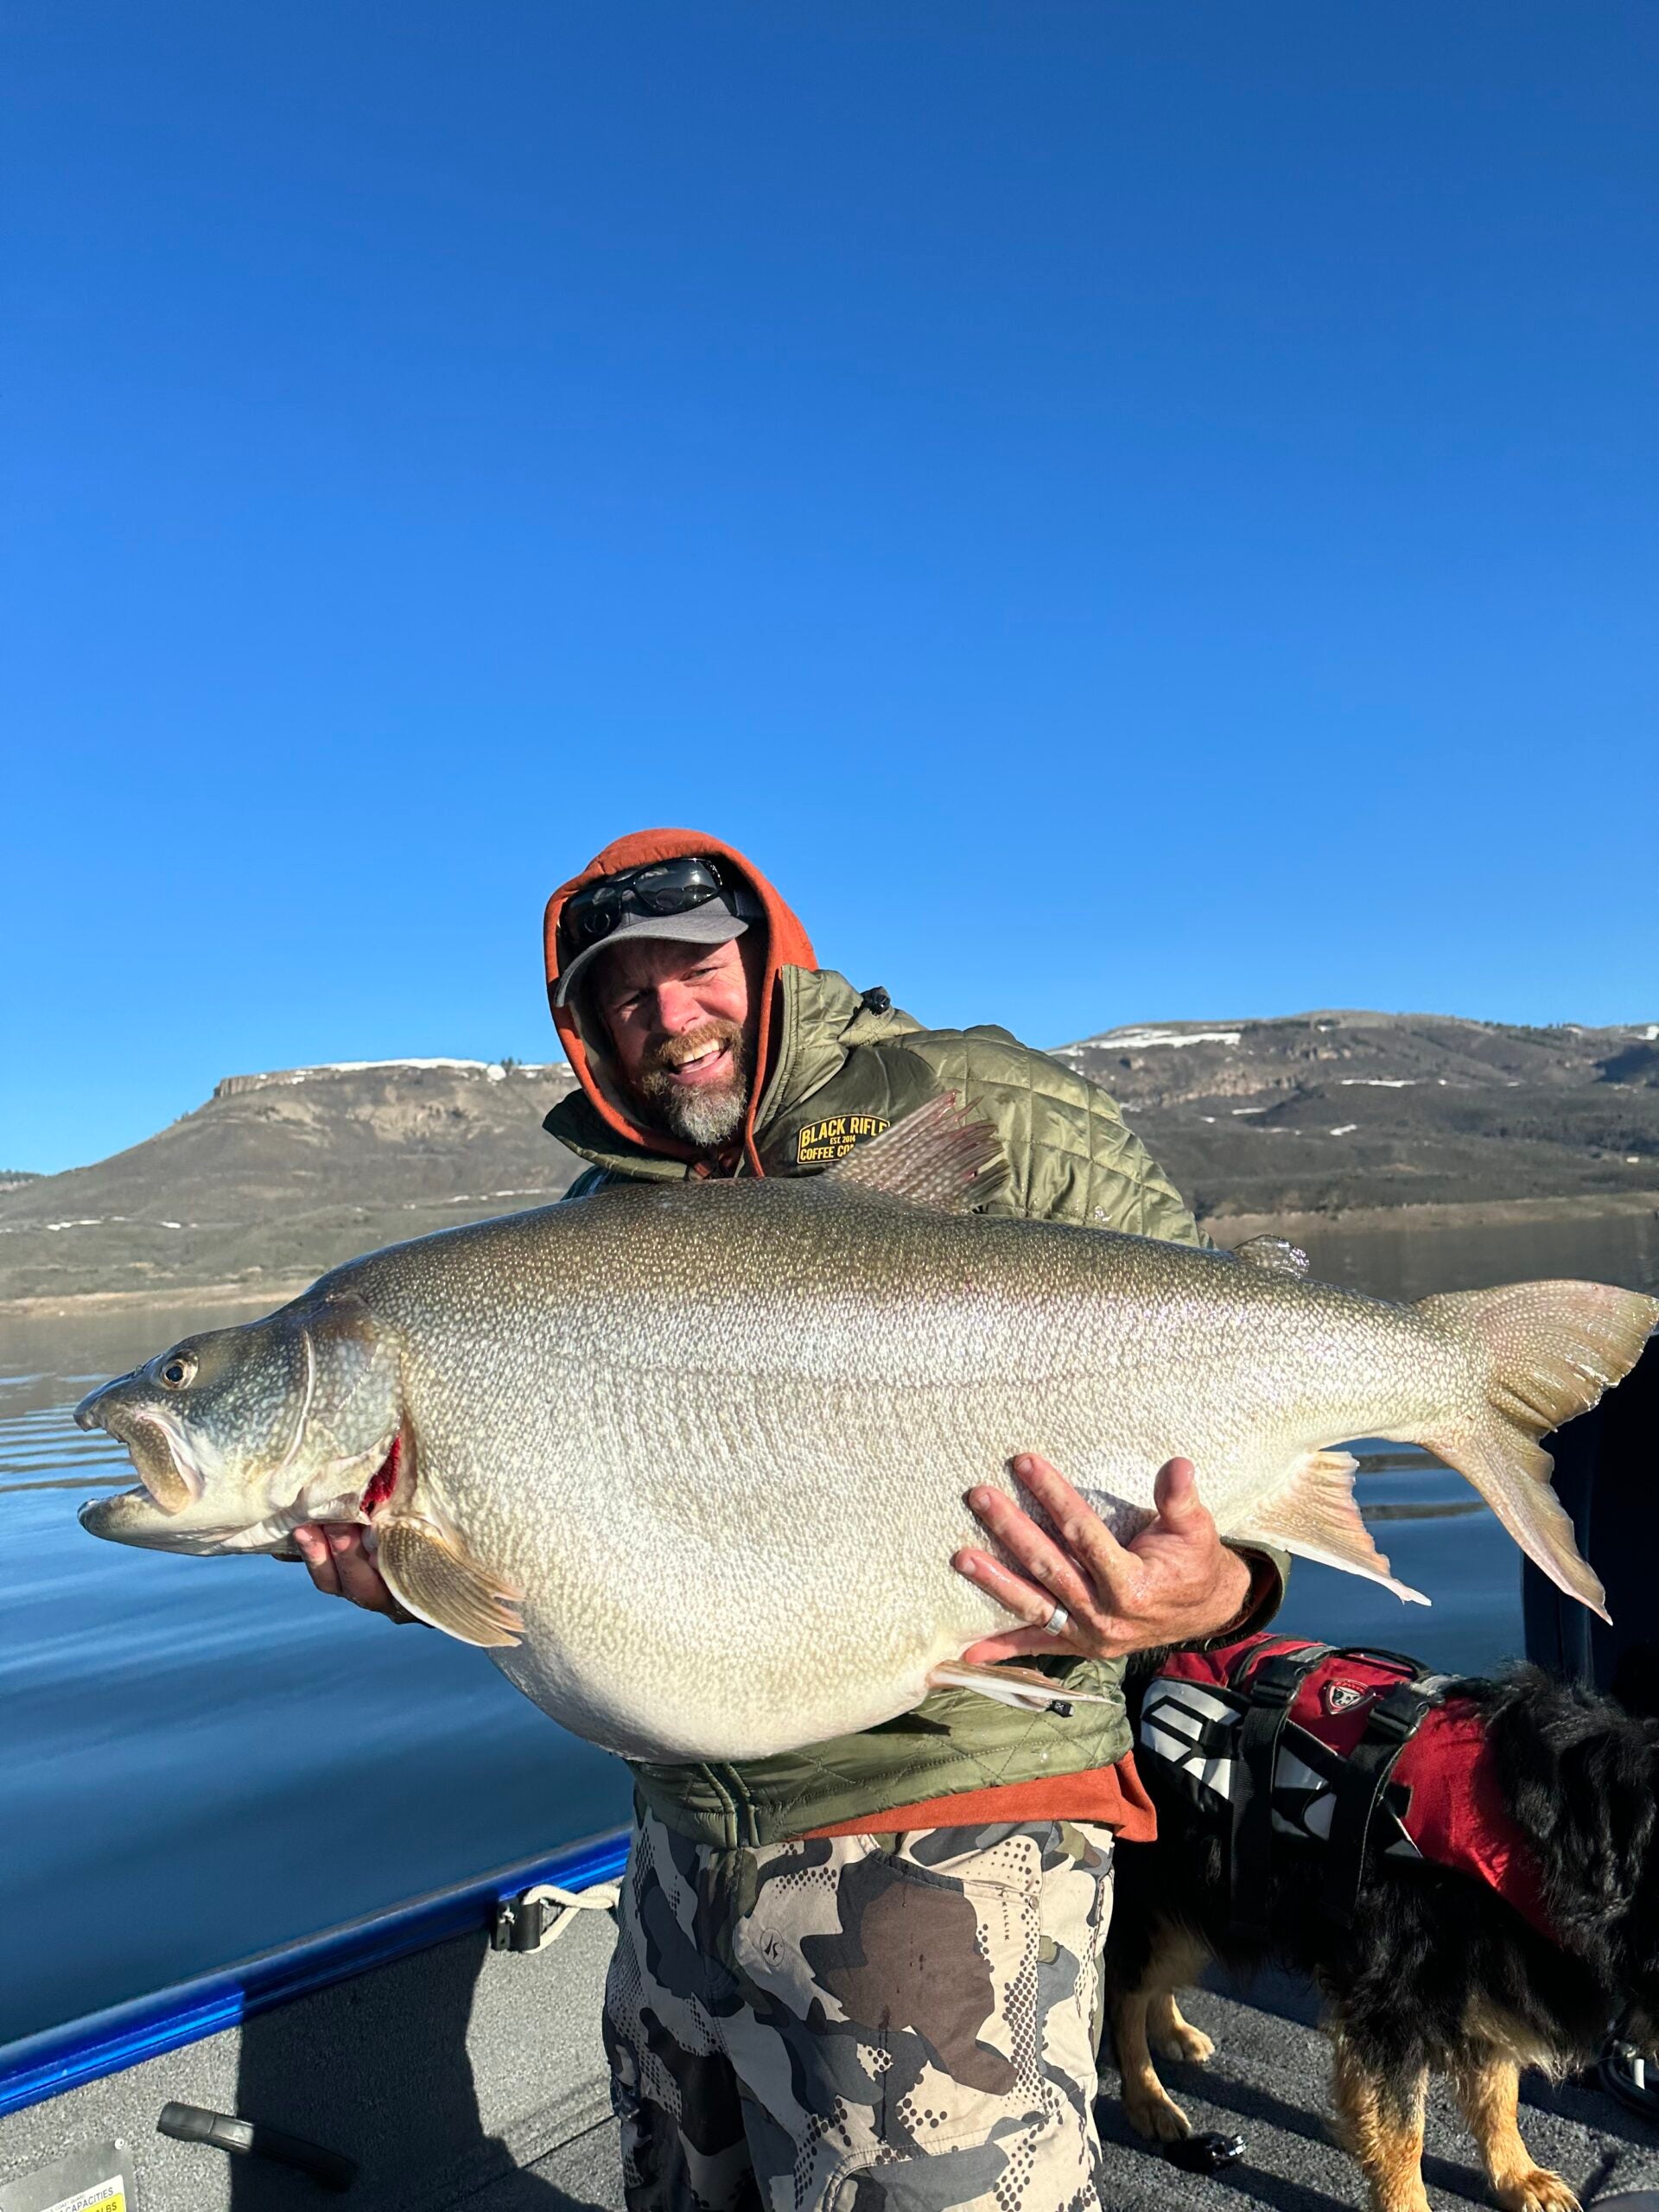 Angler Catches Likely World Record Lake Trout | Field & Stream